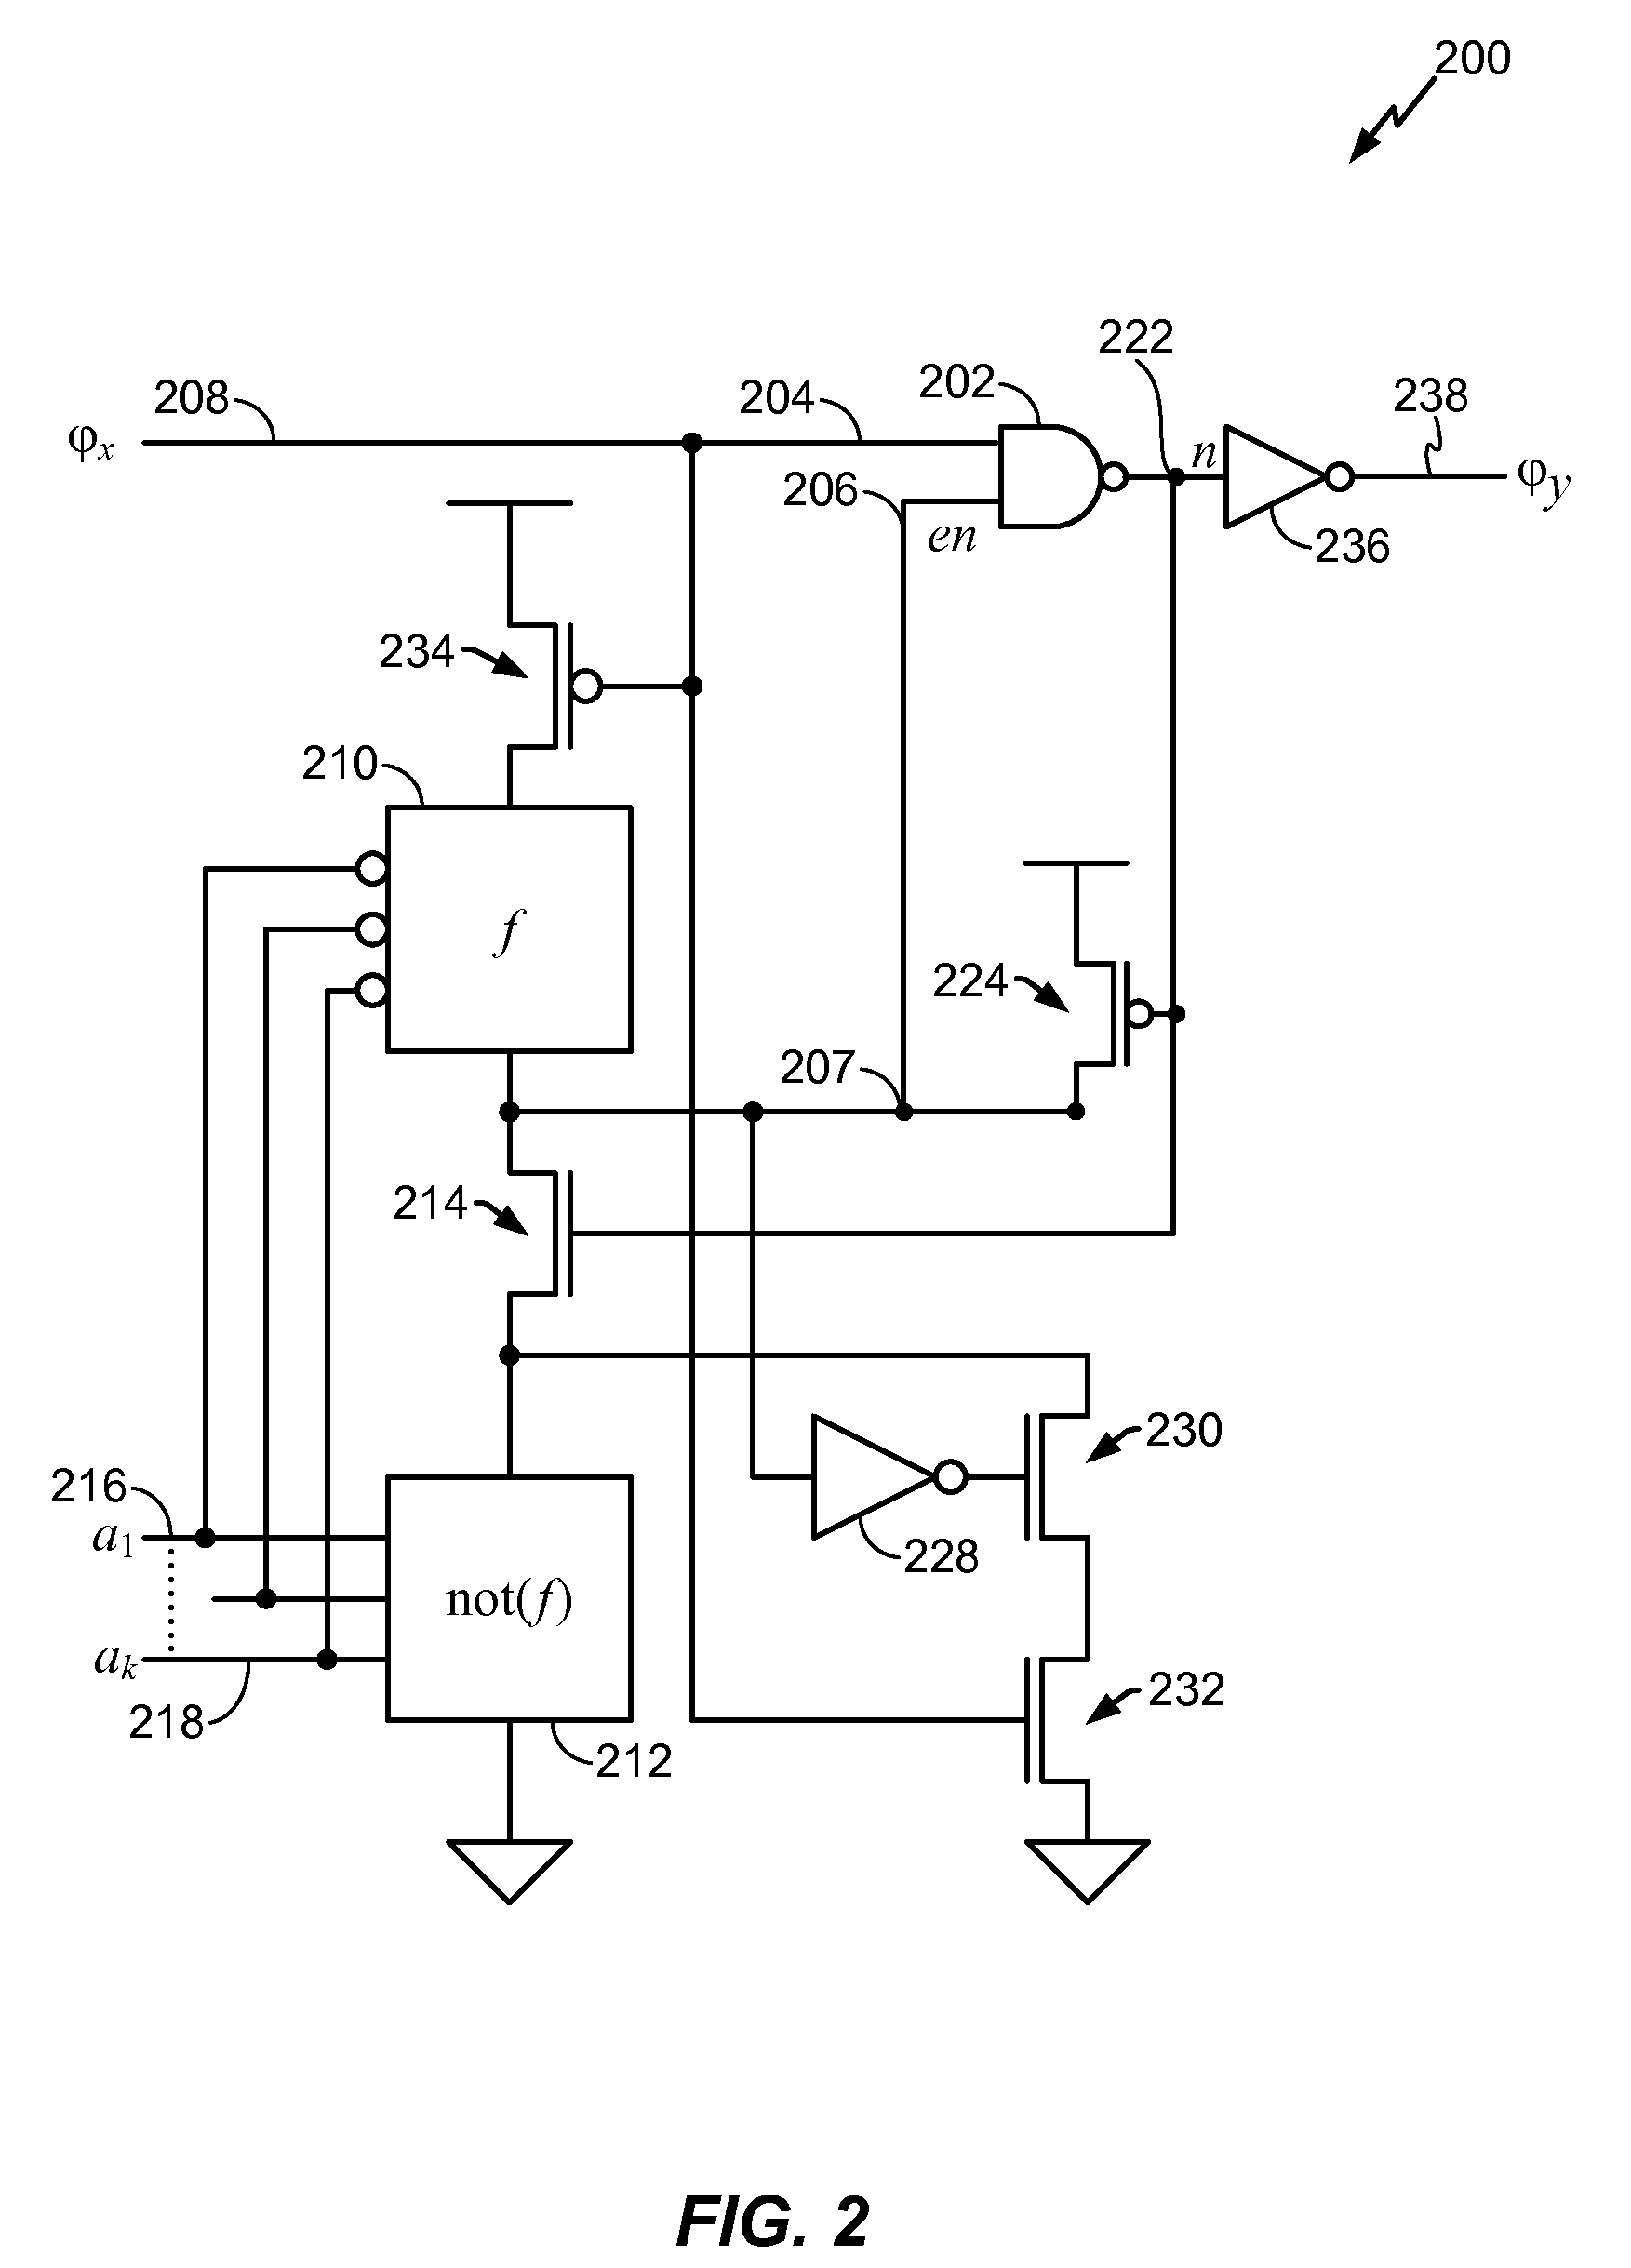 Clock Gating System and Method